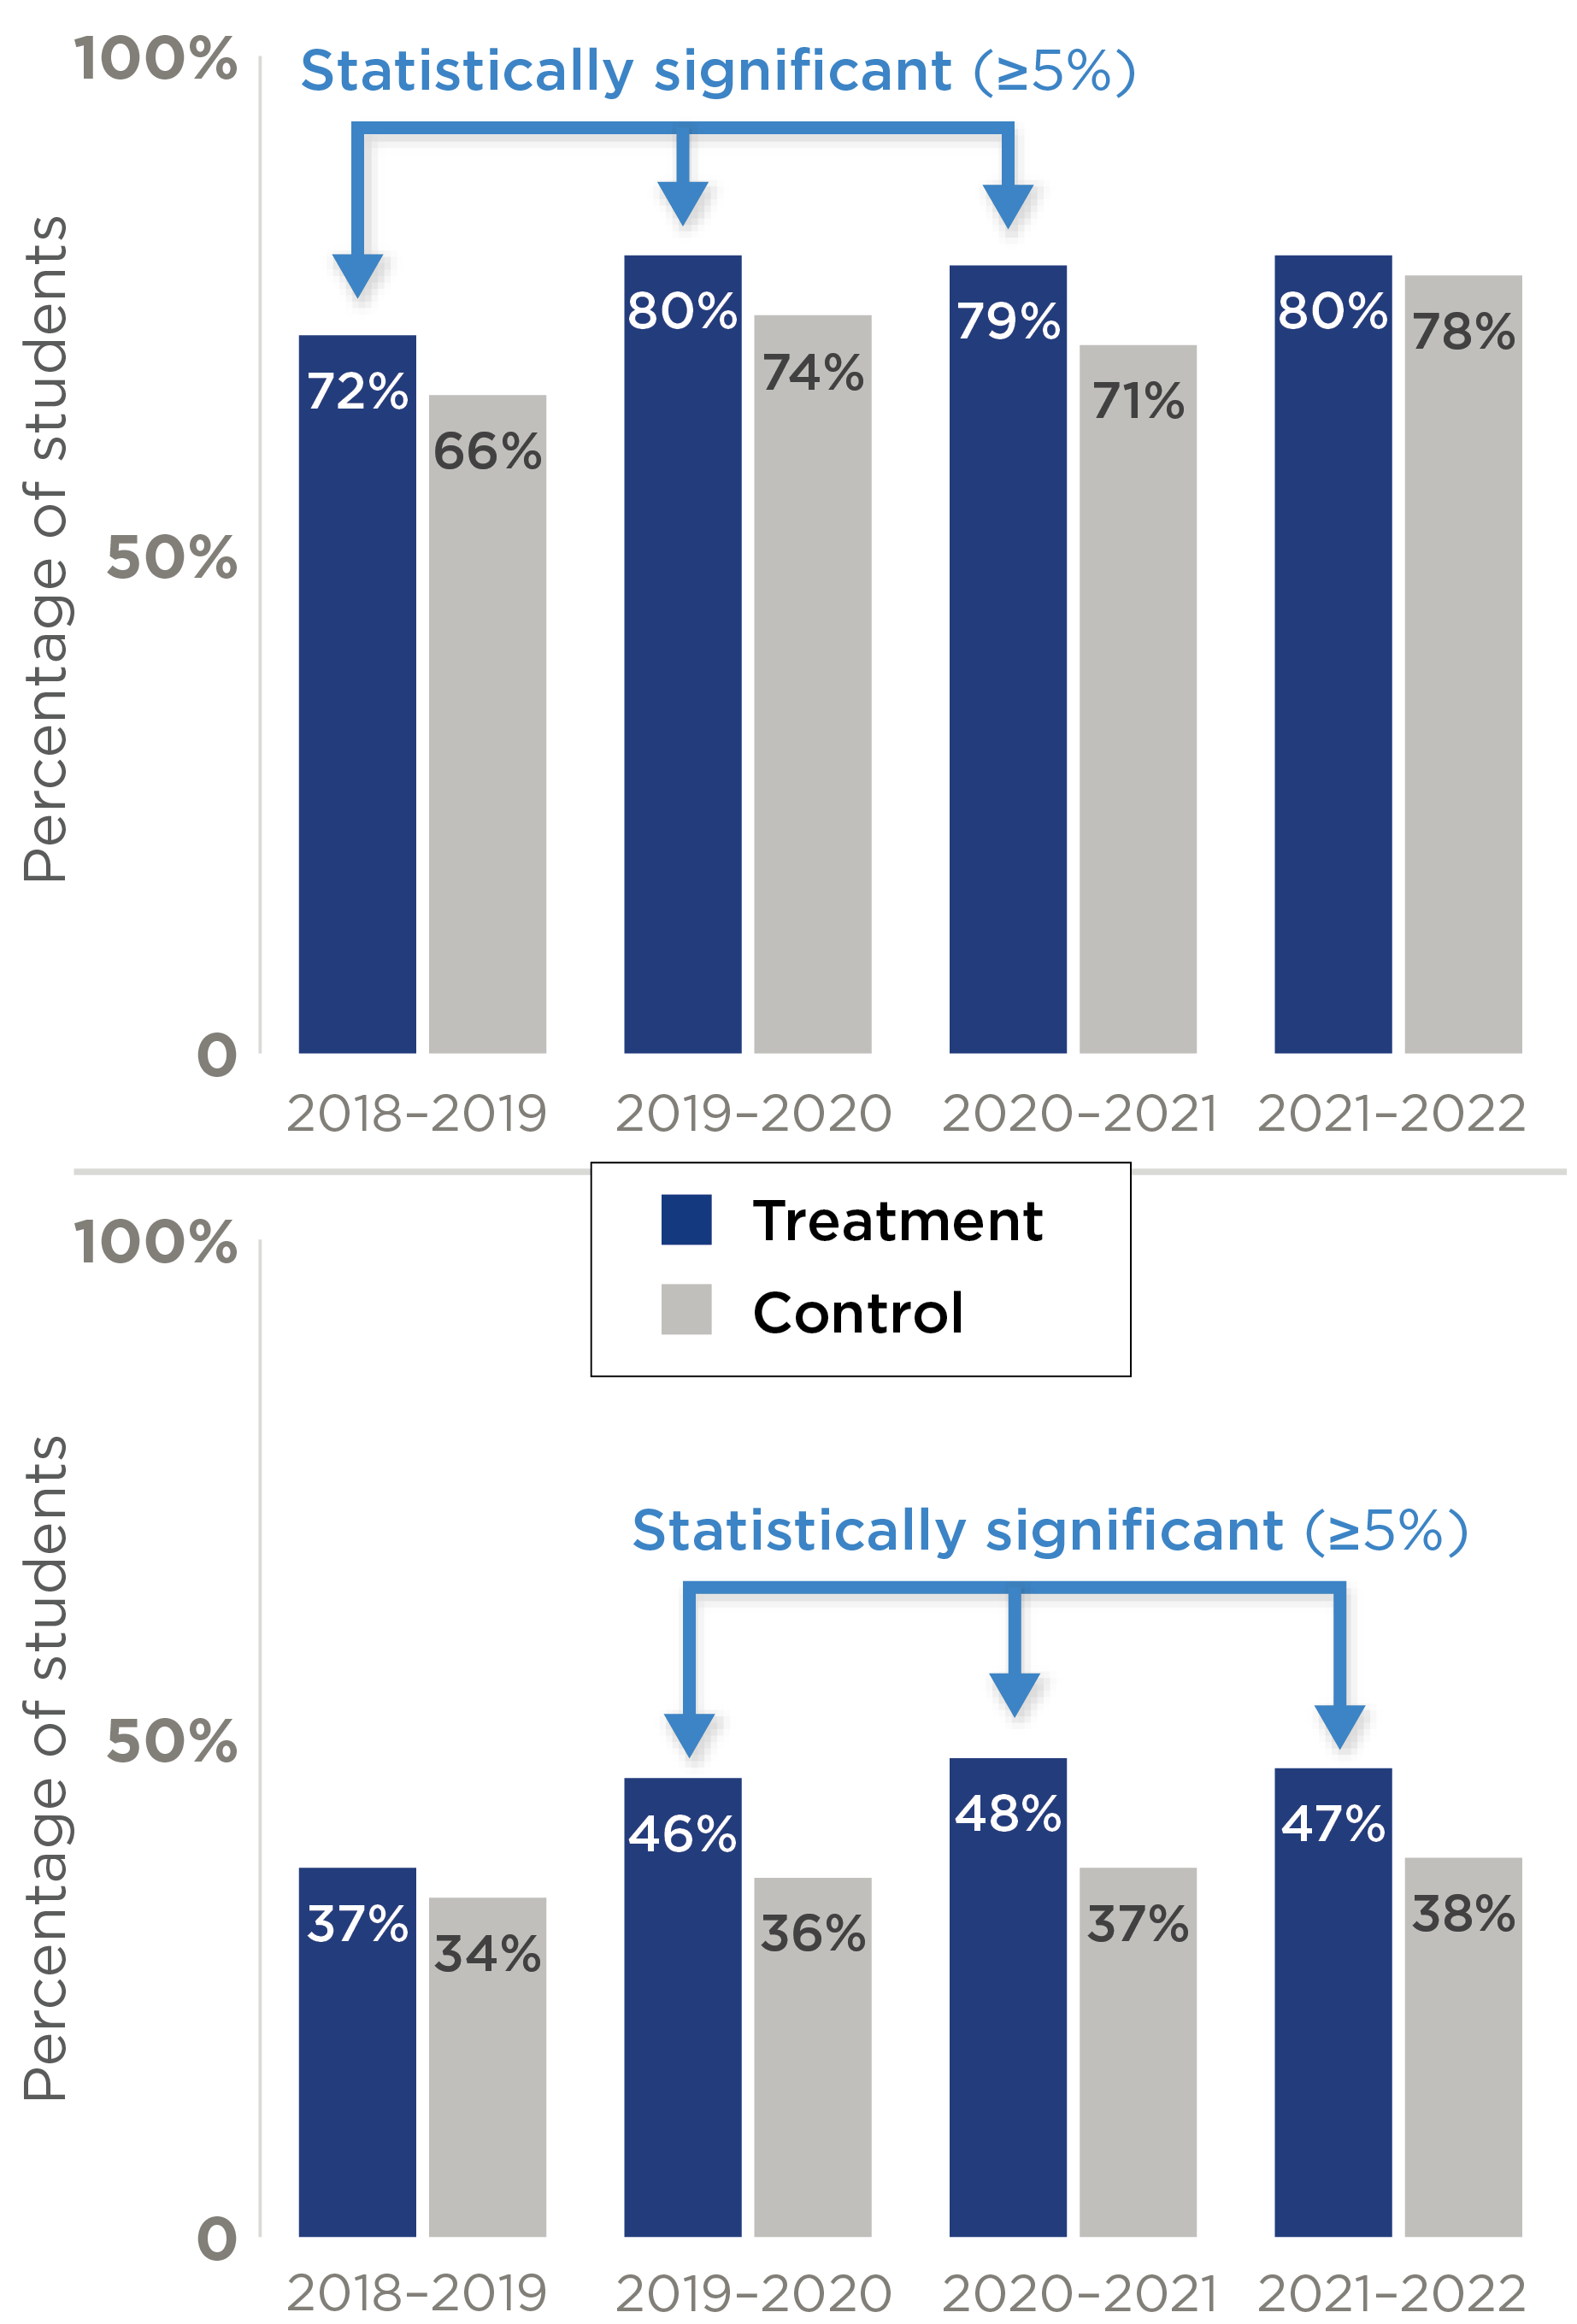 Students receiving the intervention had higher transition rates to any high school than students who were not part of the program, and the difference was significant for all years except 2021-2022. For student transition to a high school within the same school system as their middle school, the evaluation also found significant and substantive impacts on the treatment group for this indicator for all years except 2018-2019.